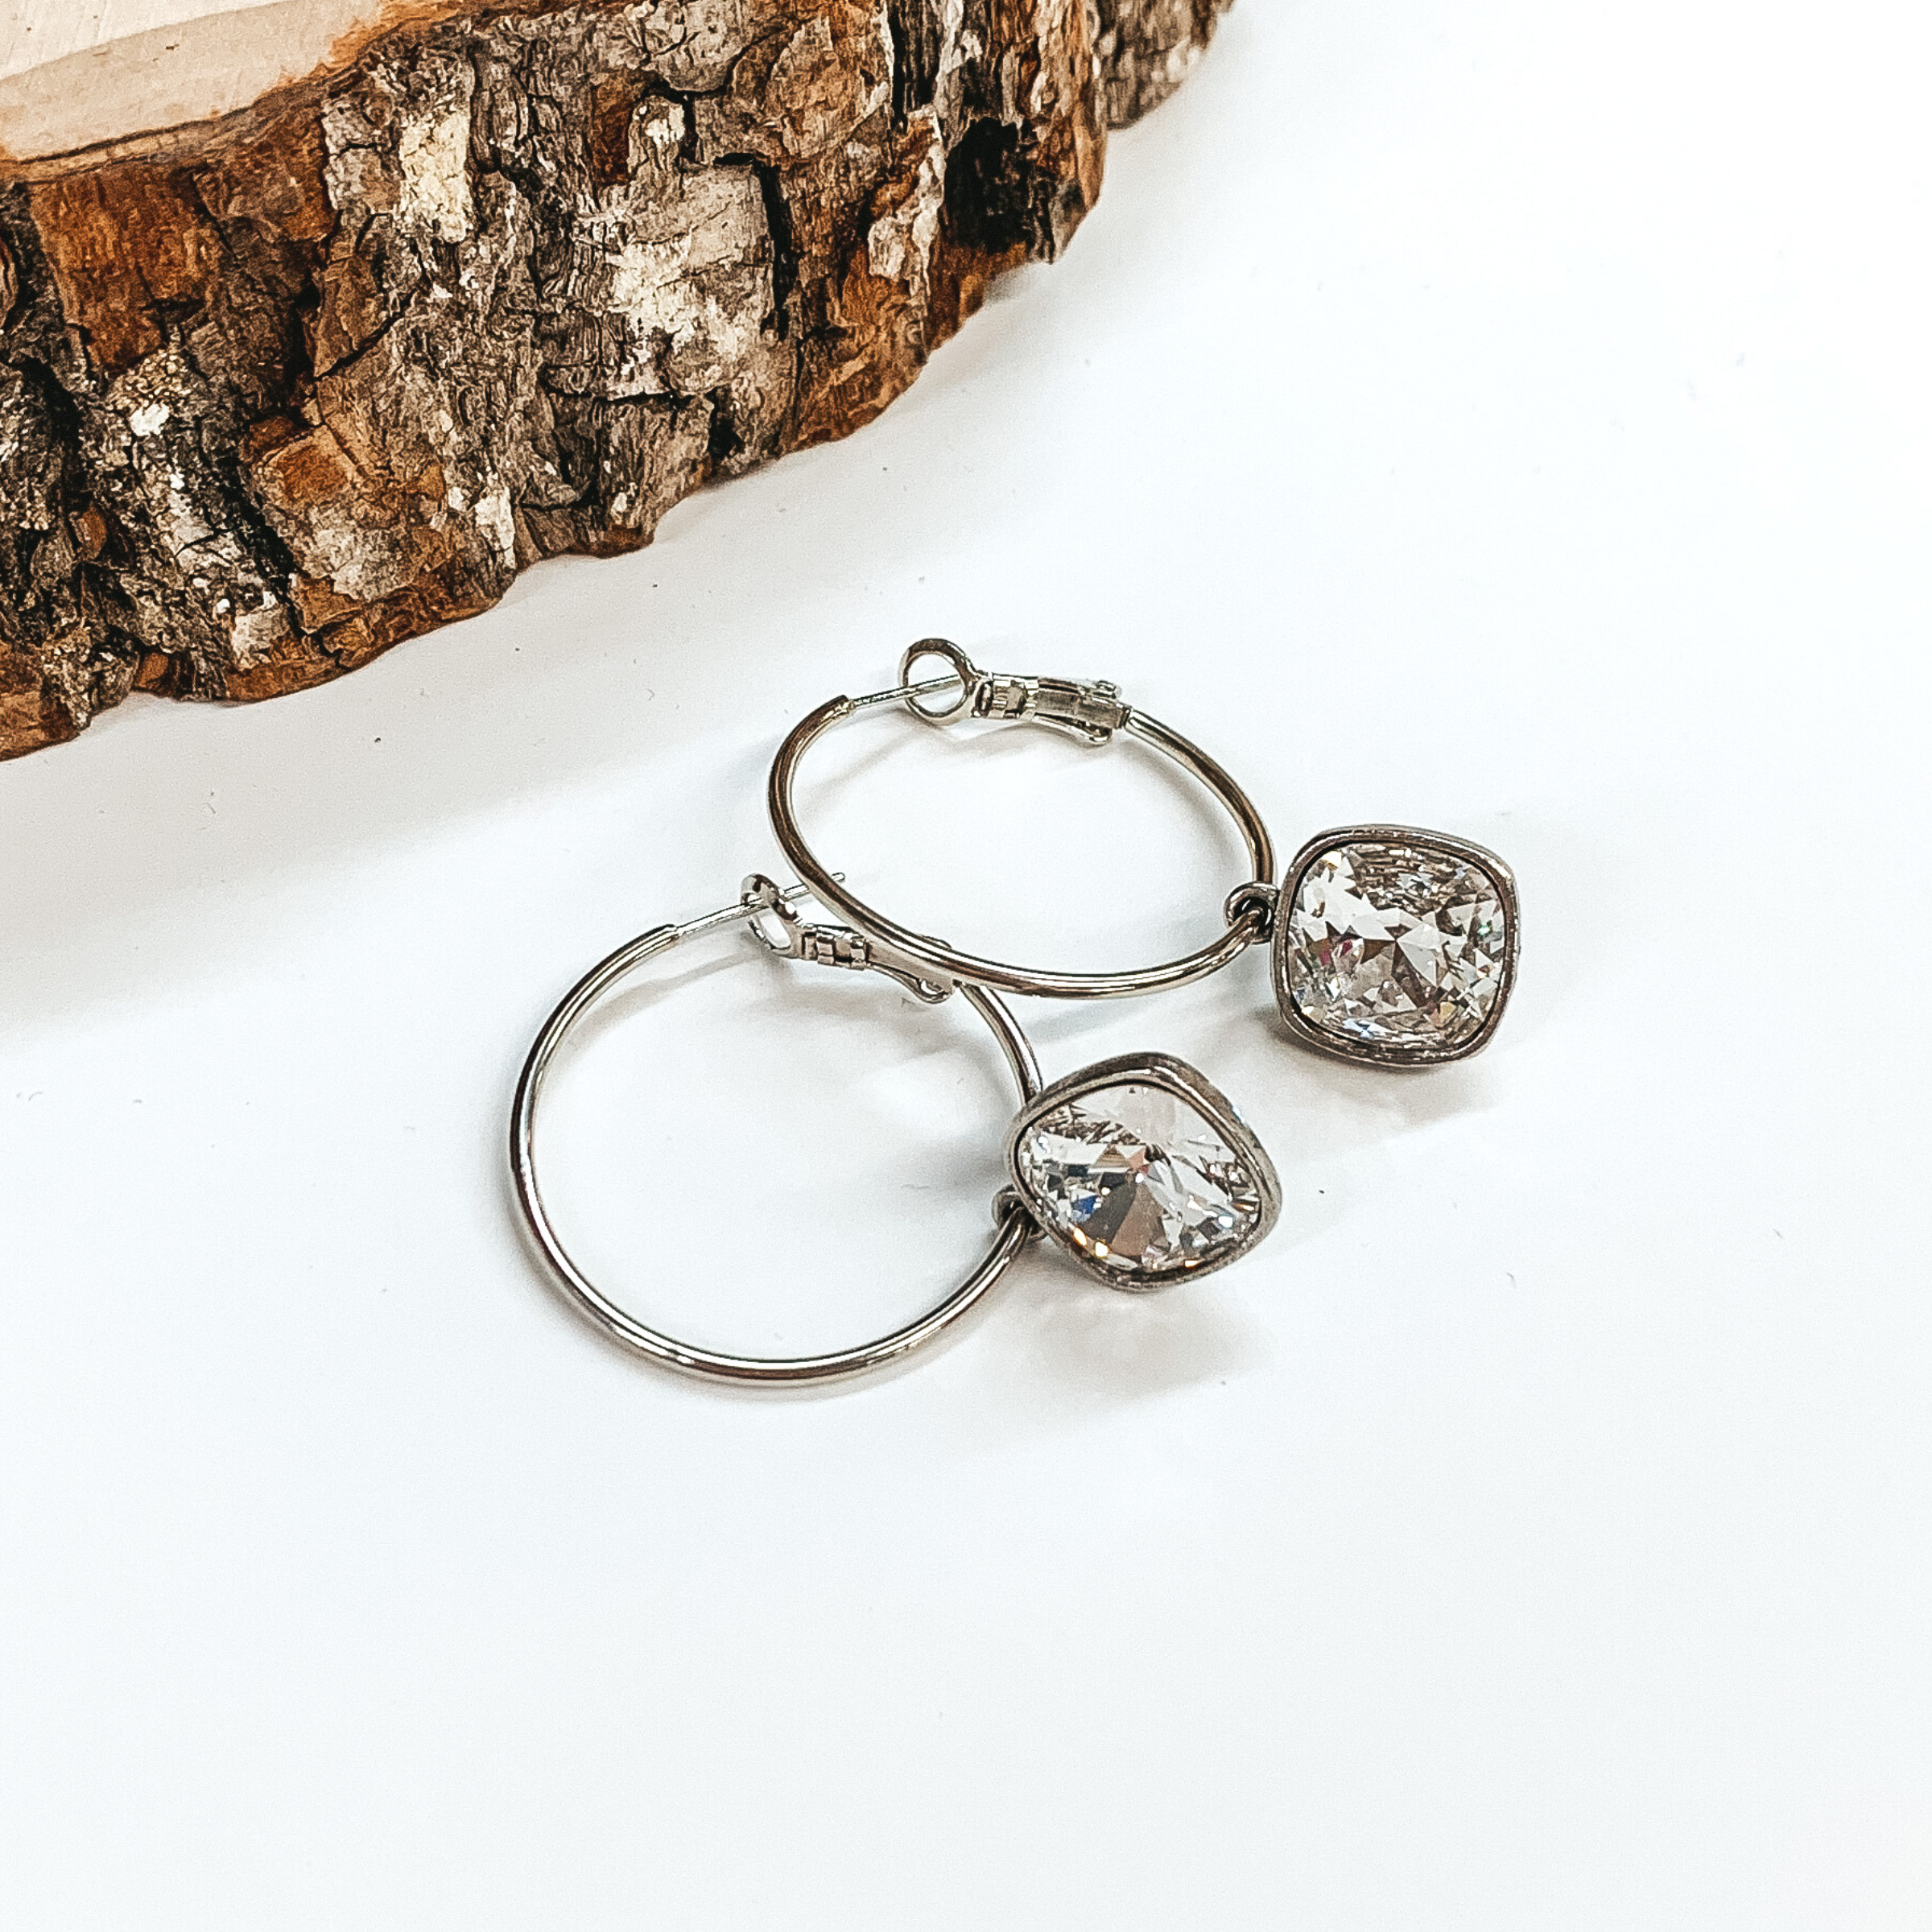 Silver hoop earrings with a clear cushion cut crystal. These earrings are pictured on a white background with a piece of wood on the top left corner. 